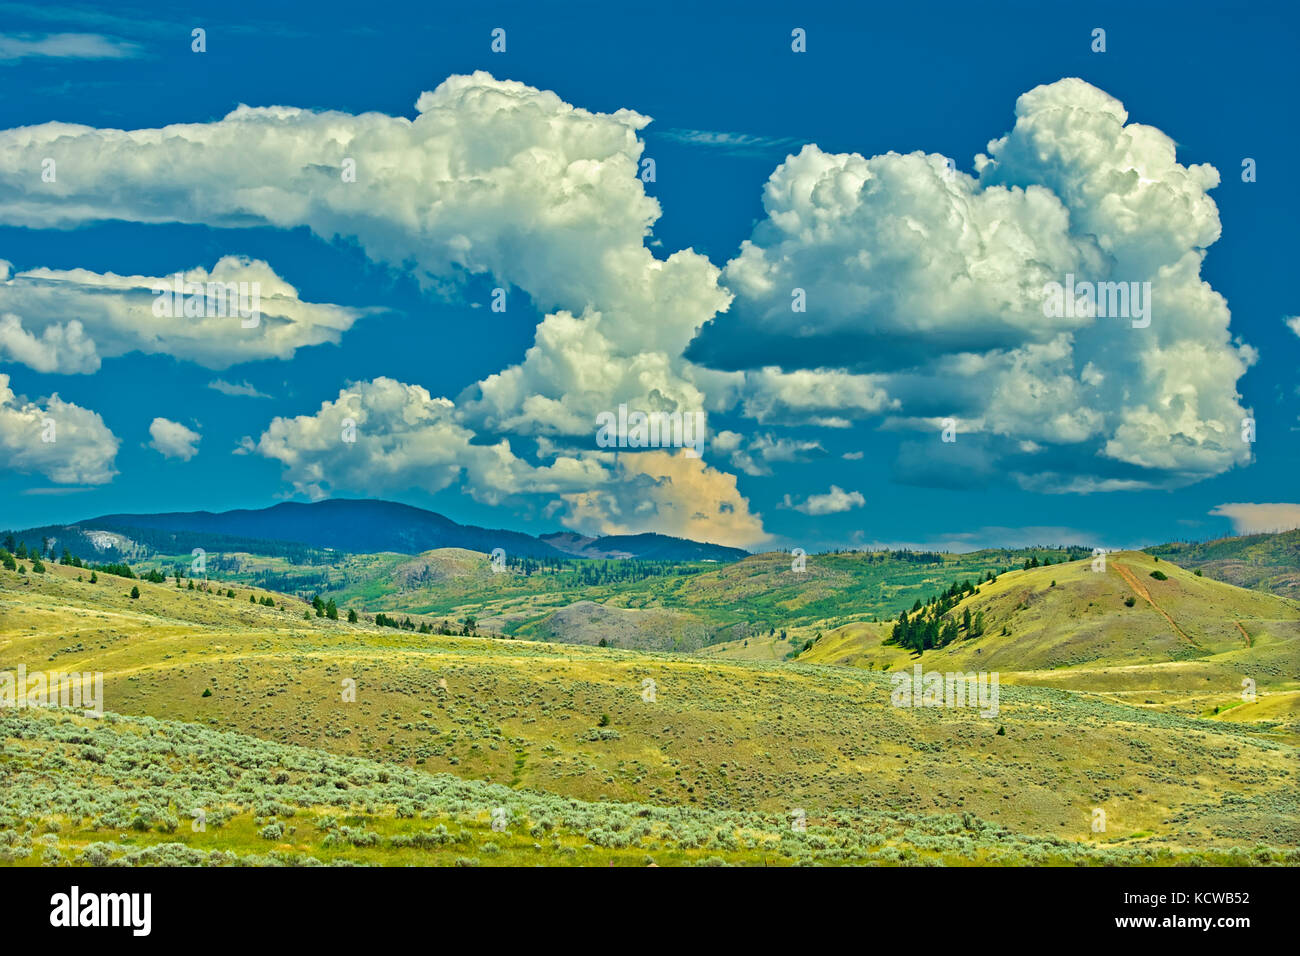 Nuvole e praterie. thompson valley, Kamloops, British Columbia, Canada Foto Stock